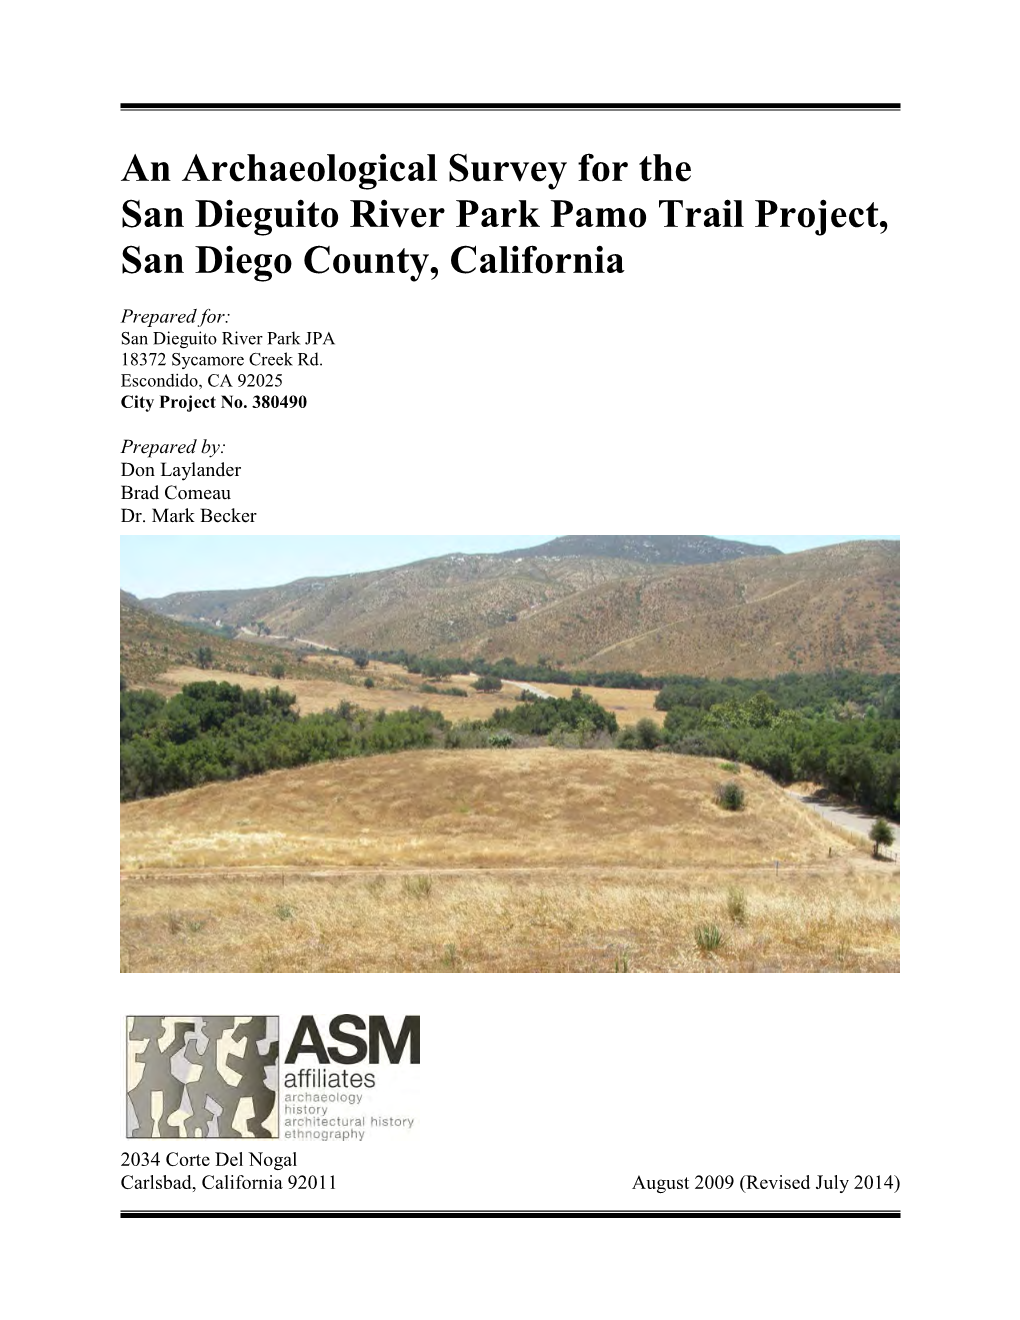 An Archaeological Survey for the San Dieguito River Park Pamo Trail Project, San Diego County, California